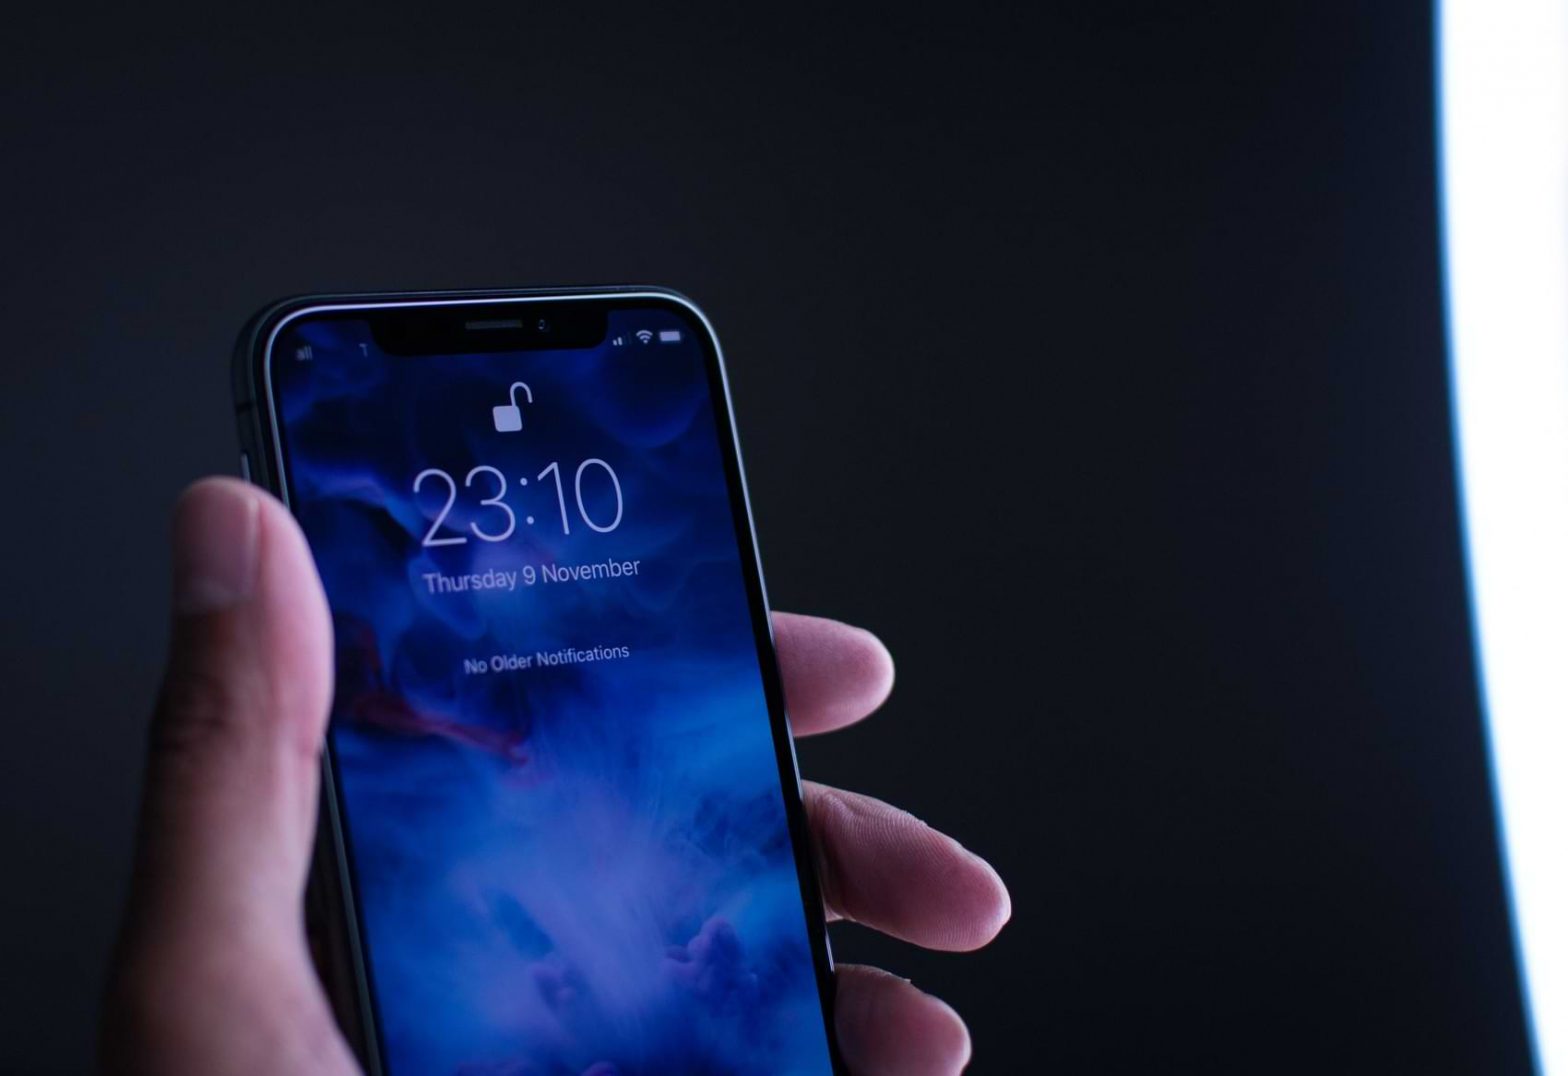 A locked phone is shown unlocking in its users hand